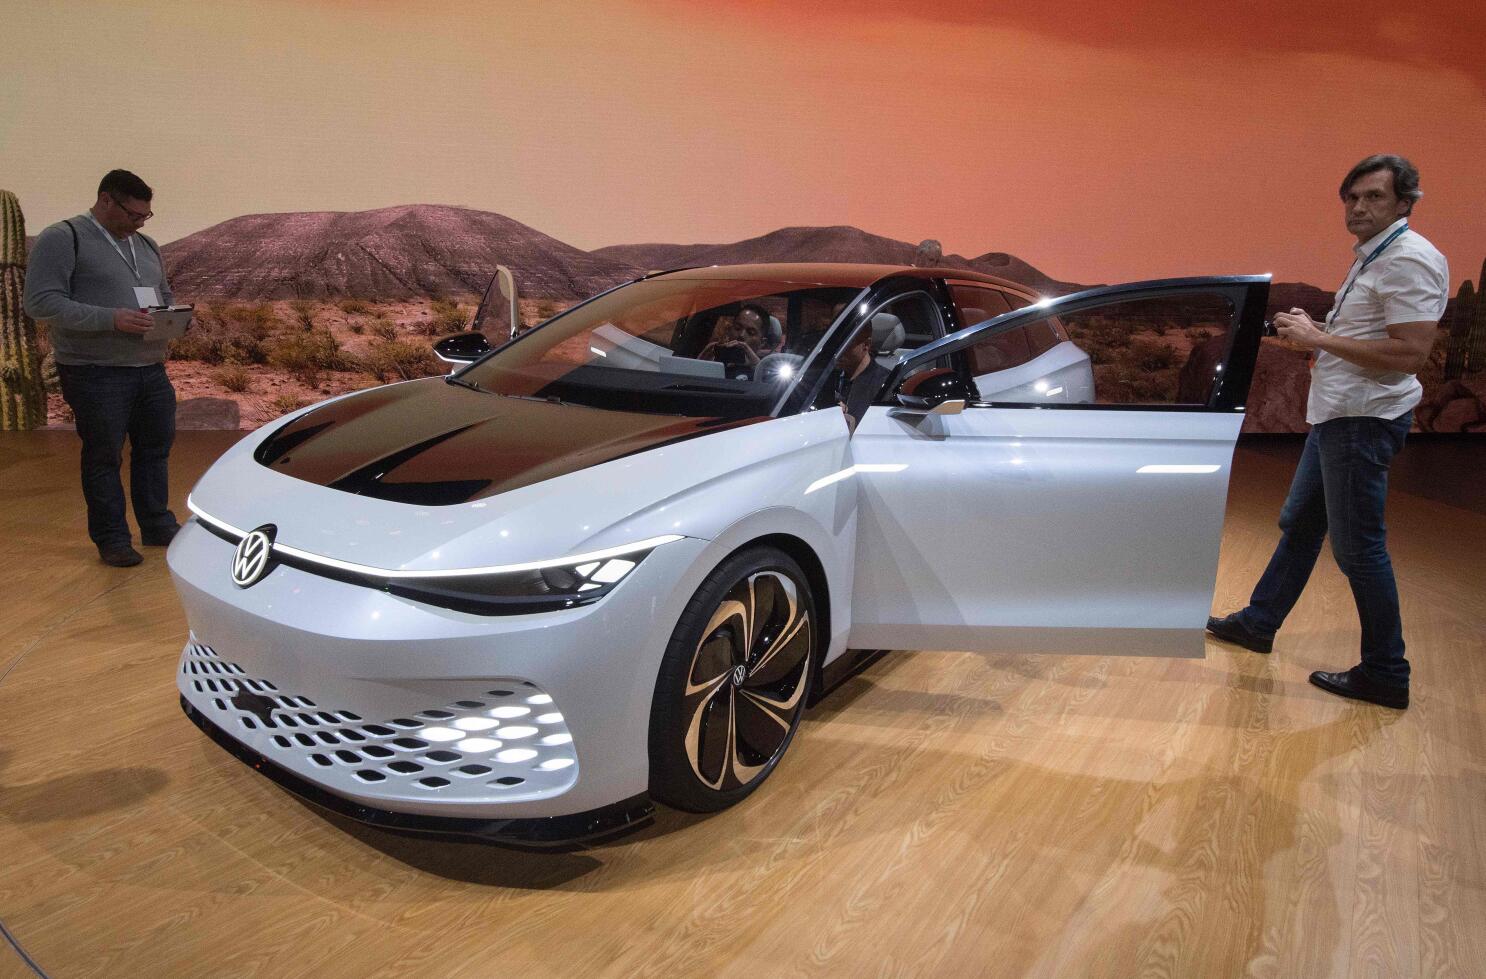 Apple reportedly developing an electric vehicle - Page 4 - Car